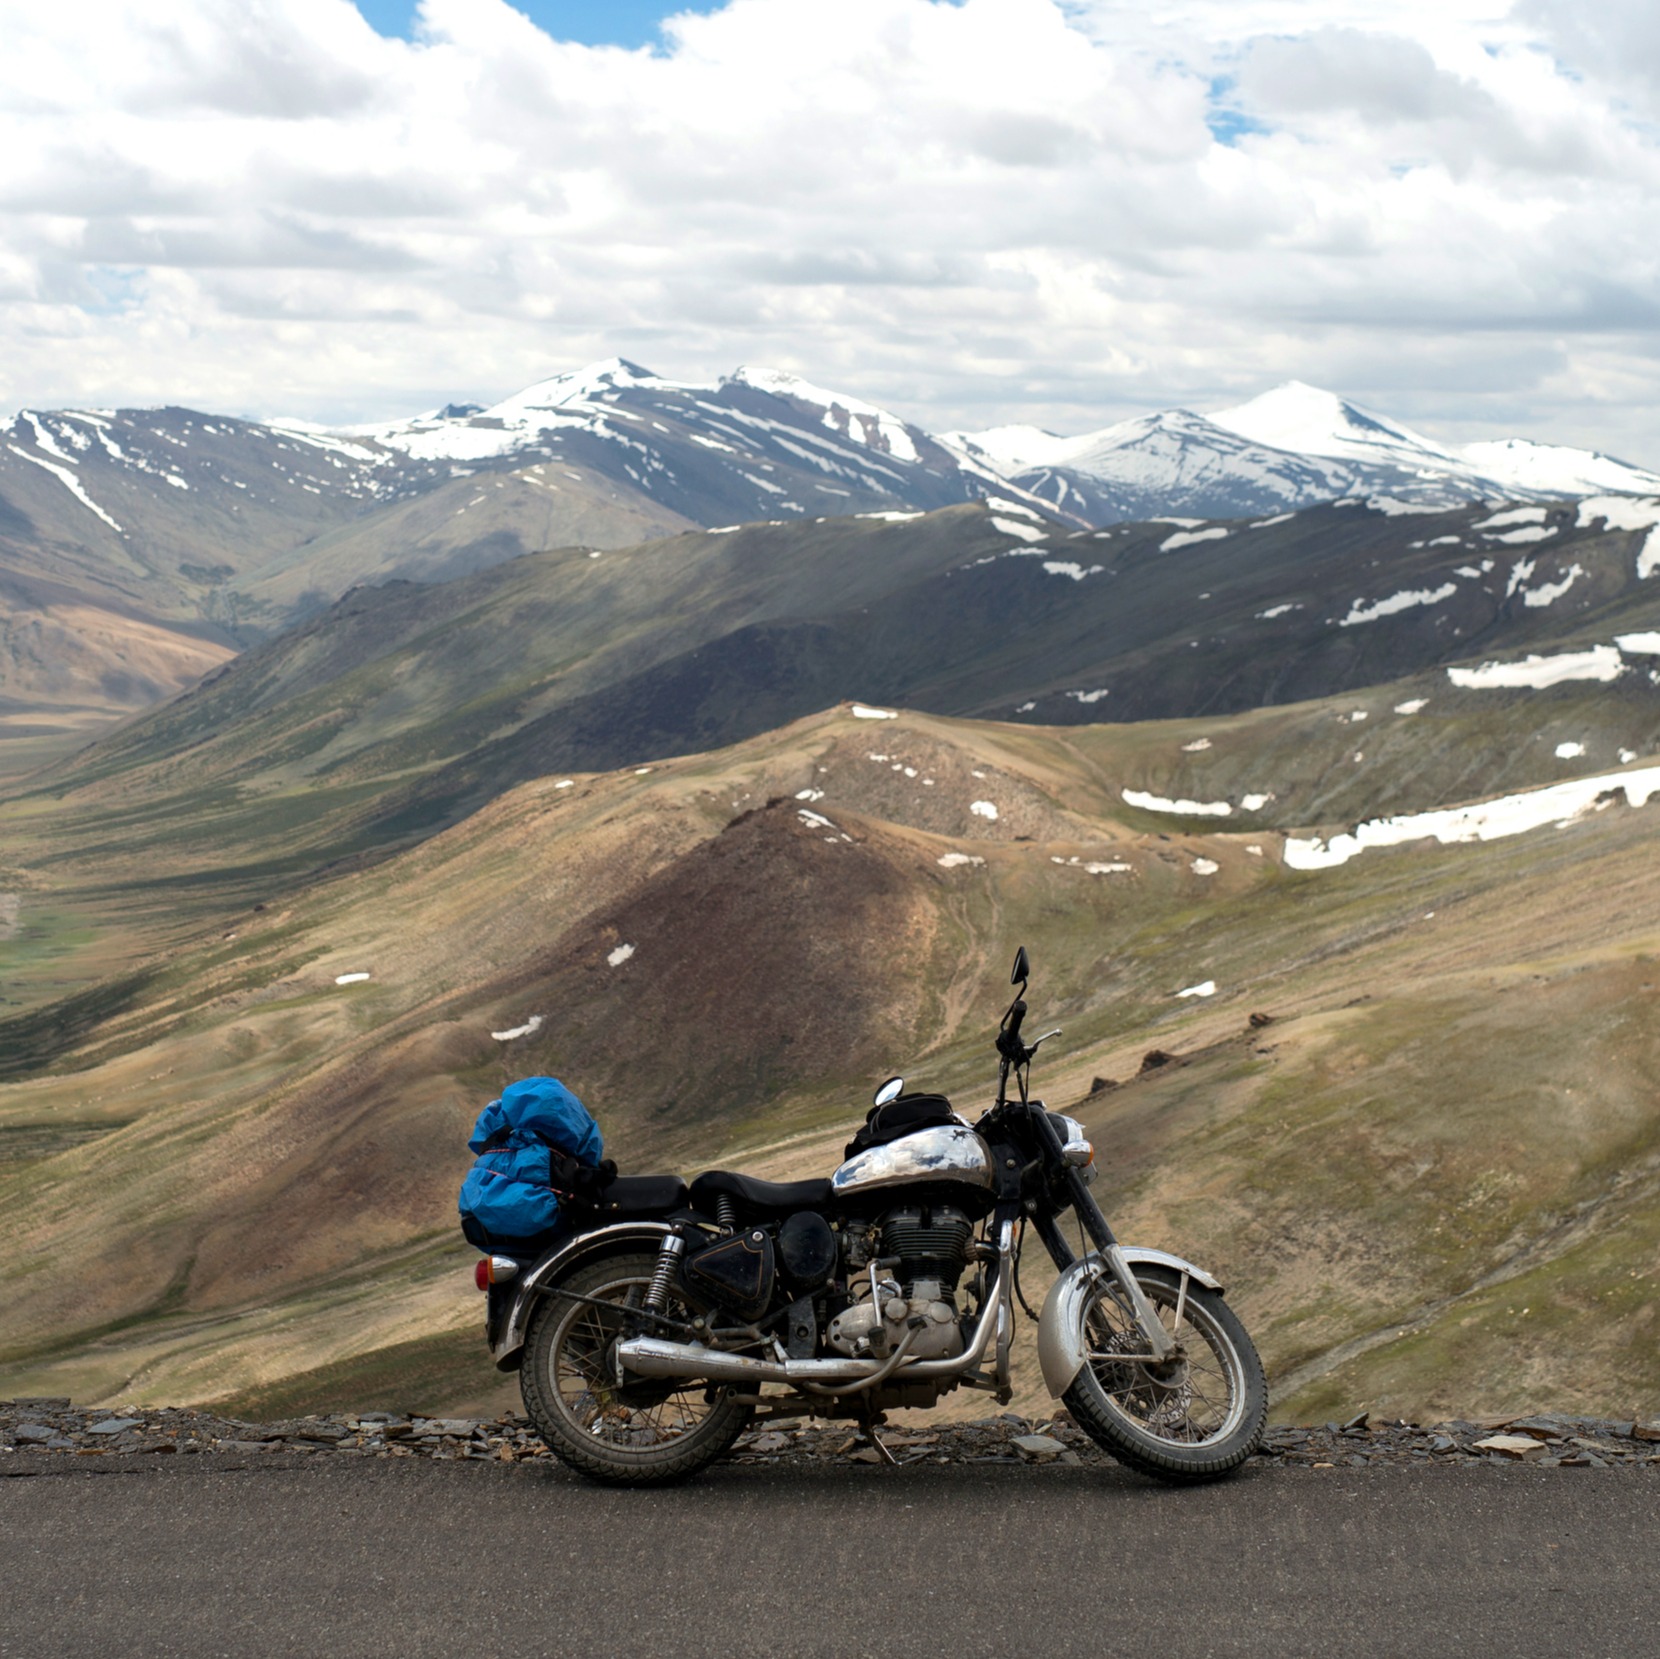 Motorcycle parked on side of road with mountains in the background